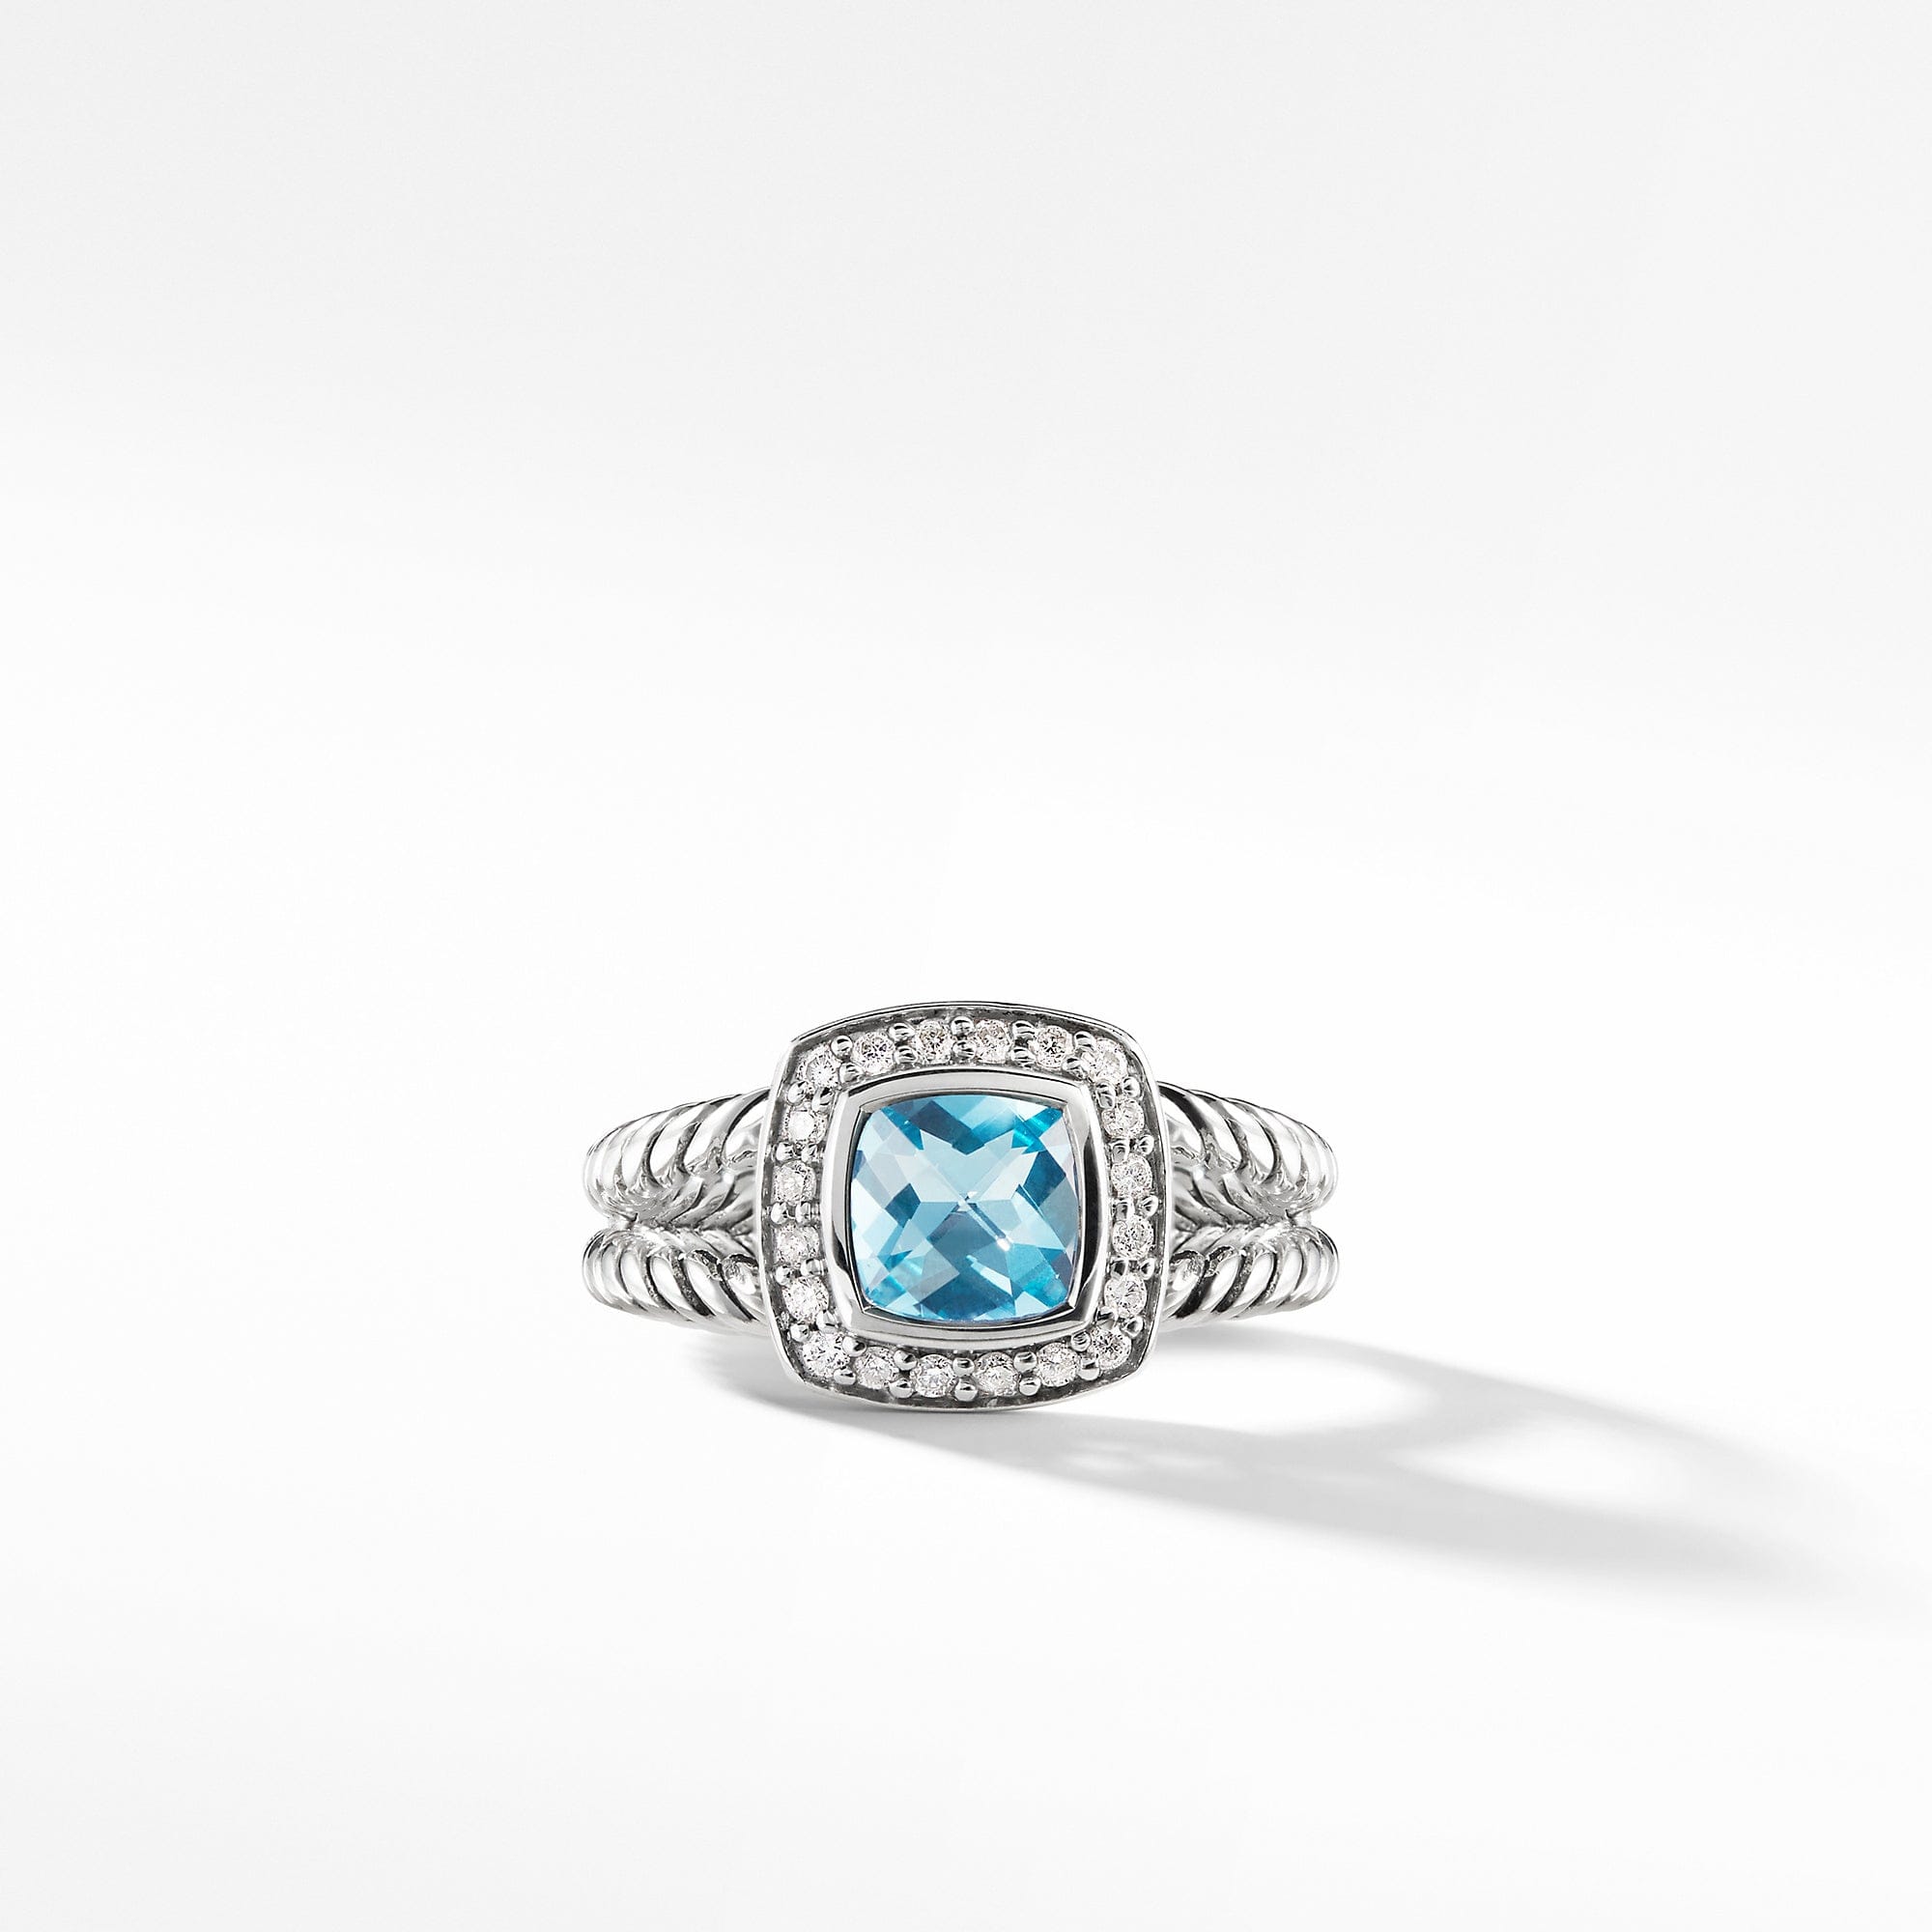 Petite Albion Ring with Blue Topaz and Diamonds